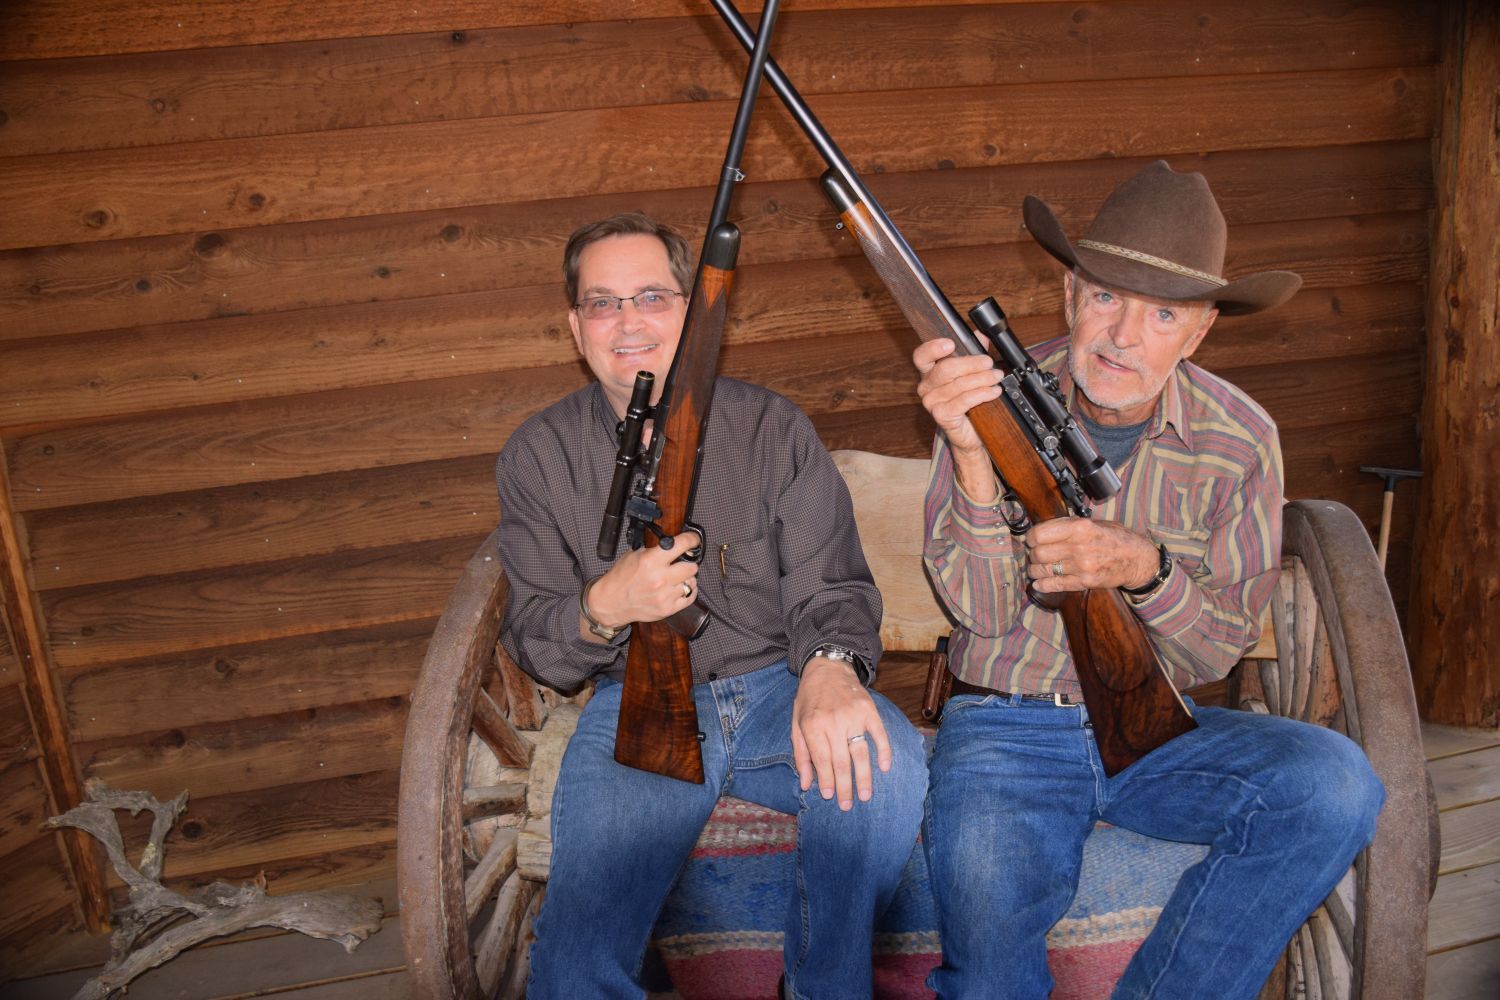 Rapid City man attempts to solve mystery of initials on classic rifle